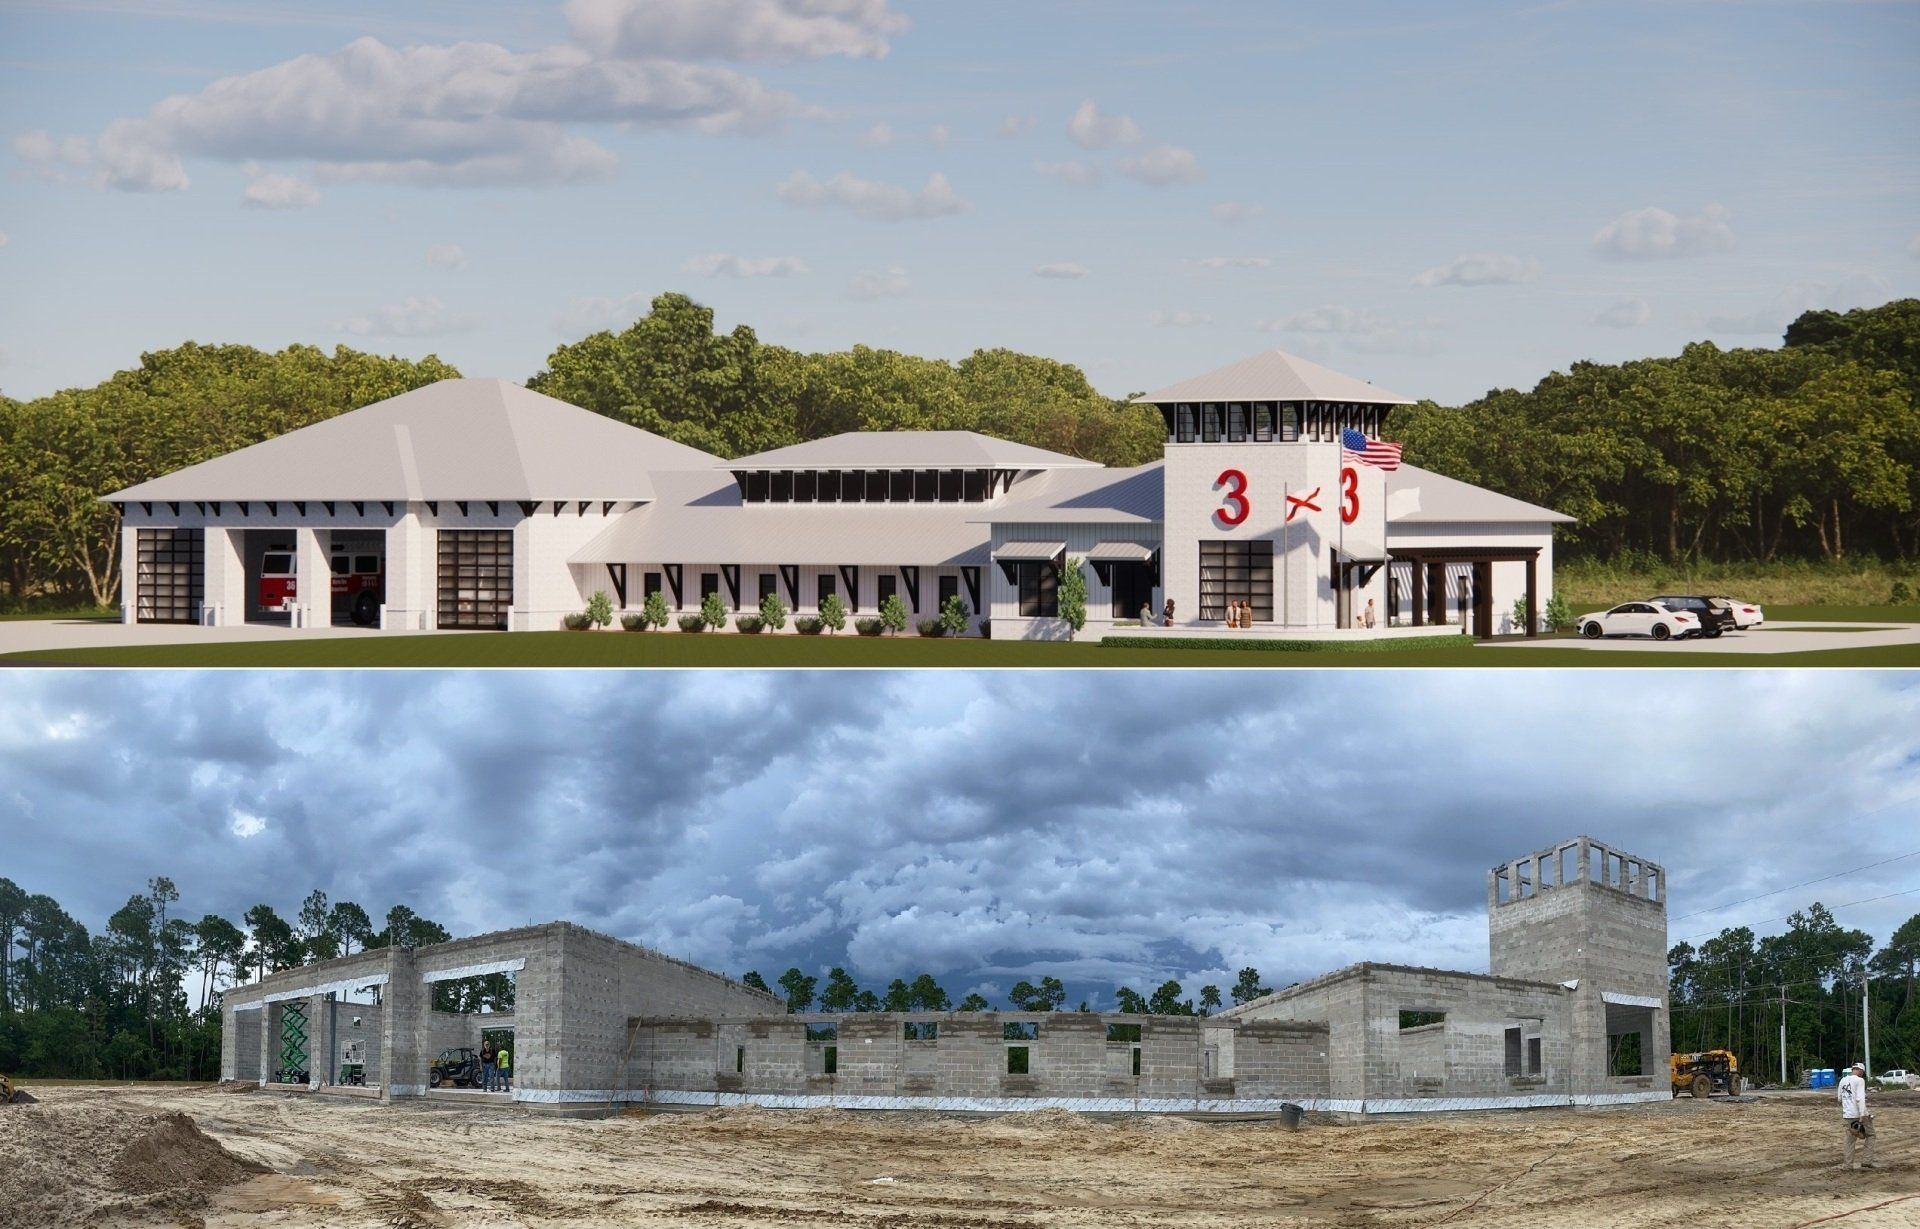 Above is a rendering of the new Orange Beach, Ala., fire station and below is the construction site.